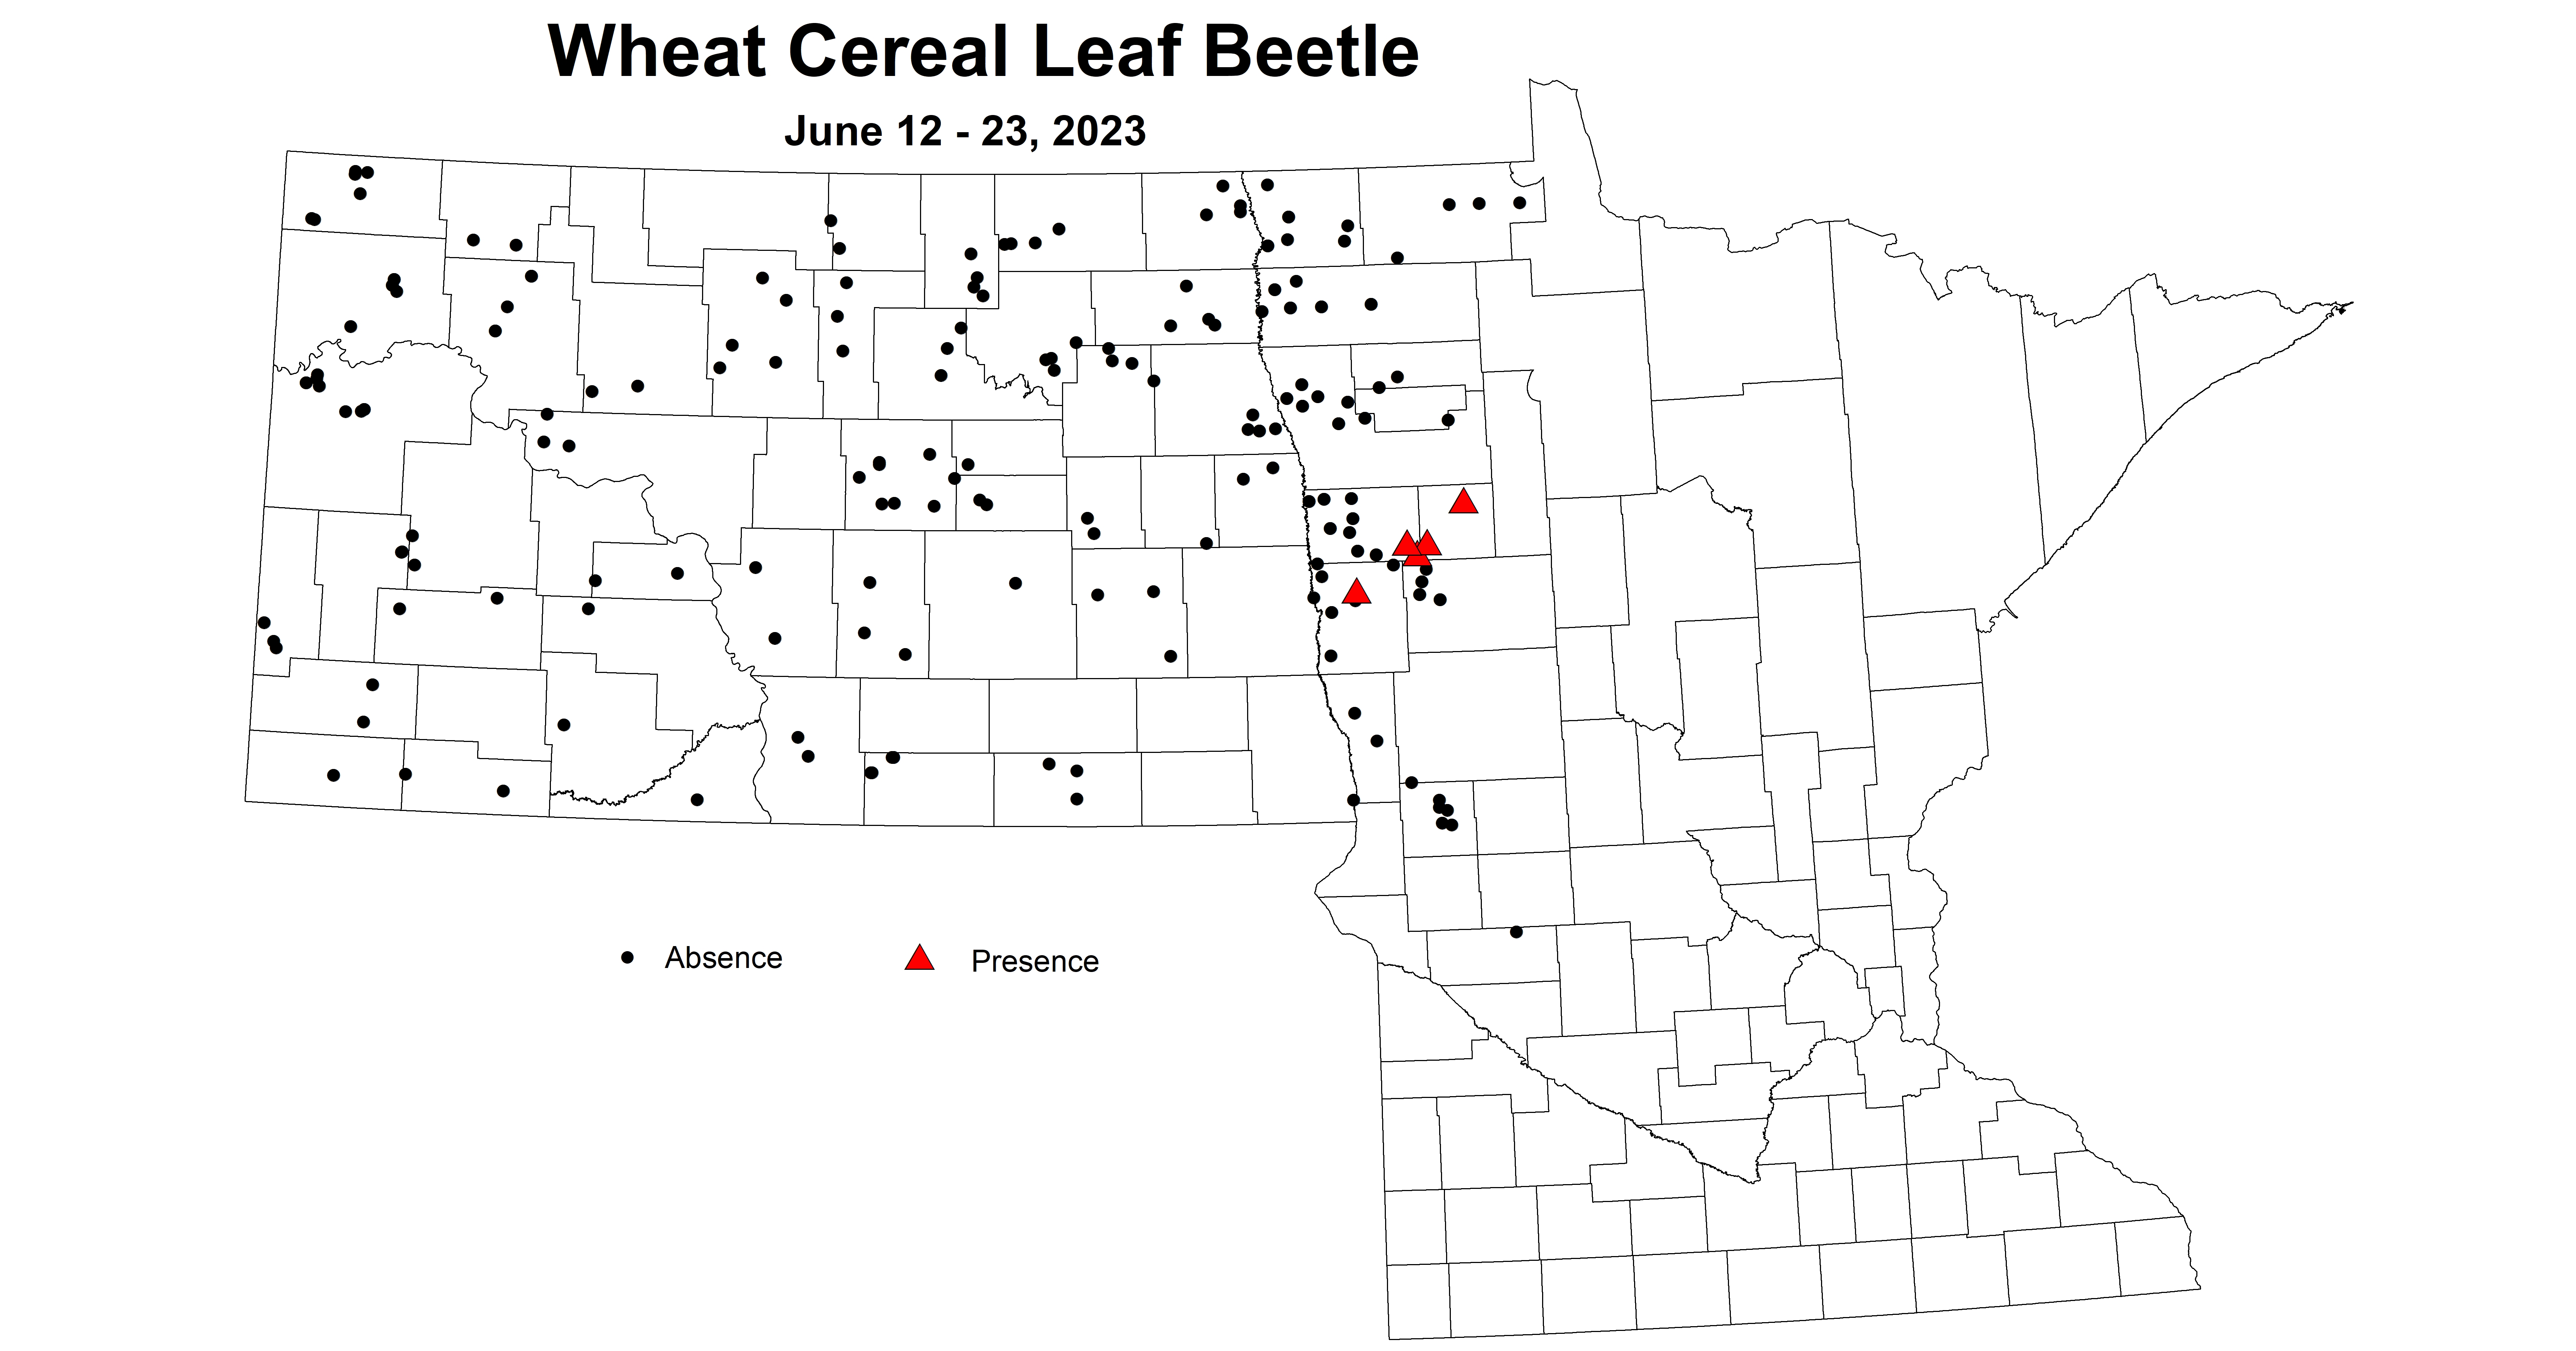 wheat cereal leaf beetle June 12-23 2023 updated